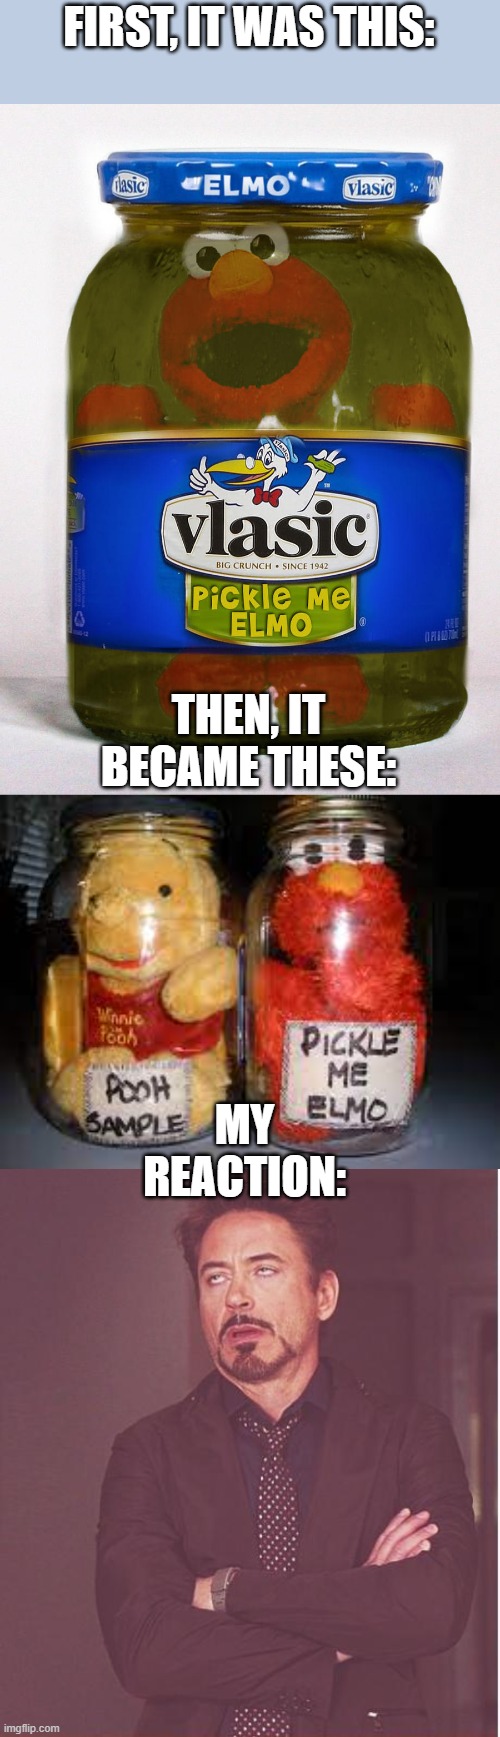 Pickle Me Elmo | FIRST, IT WAS THIS:; THEN, IT BECAME THESE:; MY REACTION: | image tagged in memes,face you make robert downey jr | made w/ Imgflip meme maker